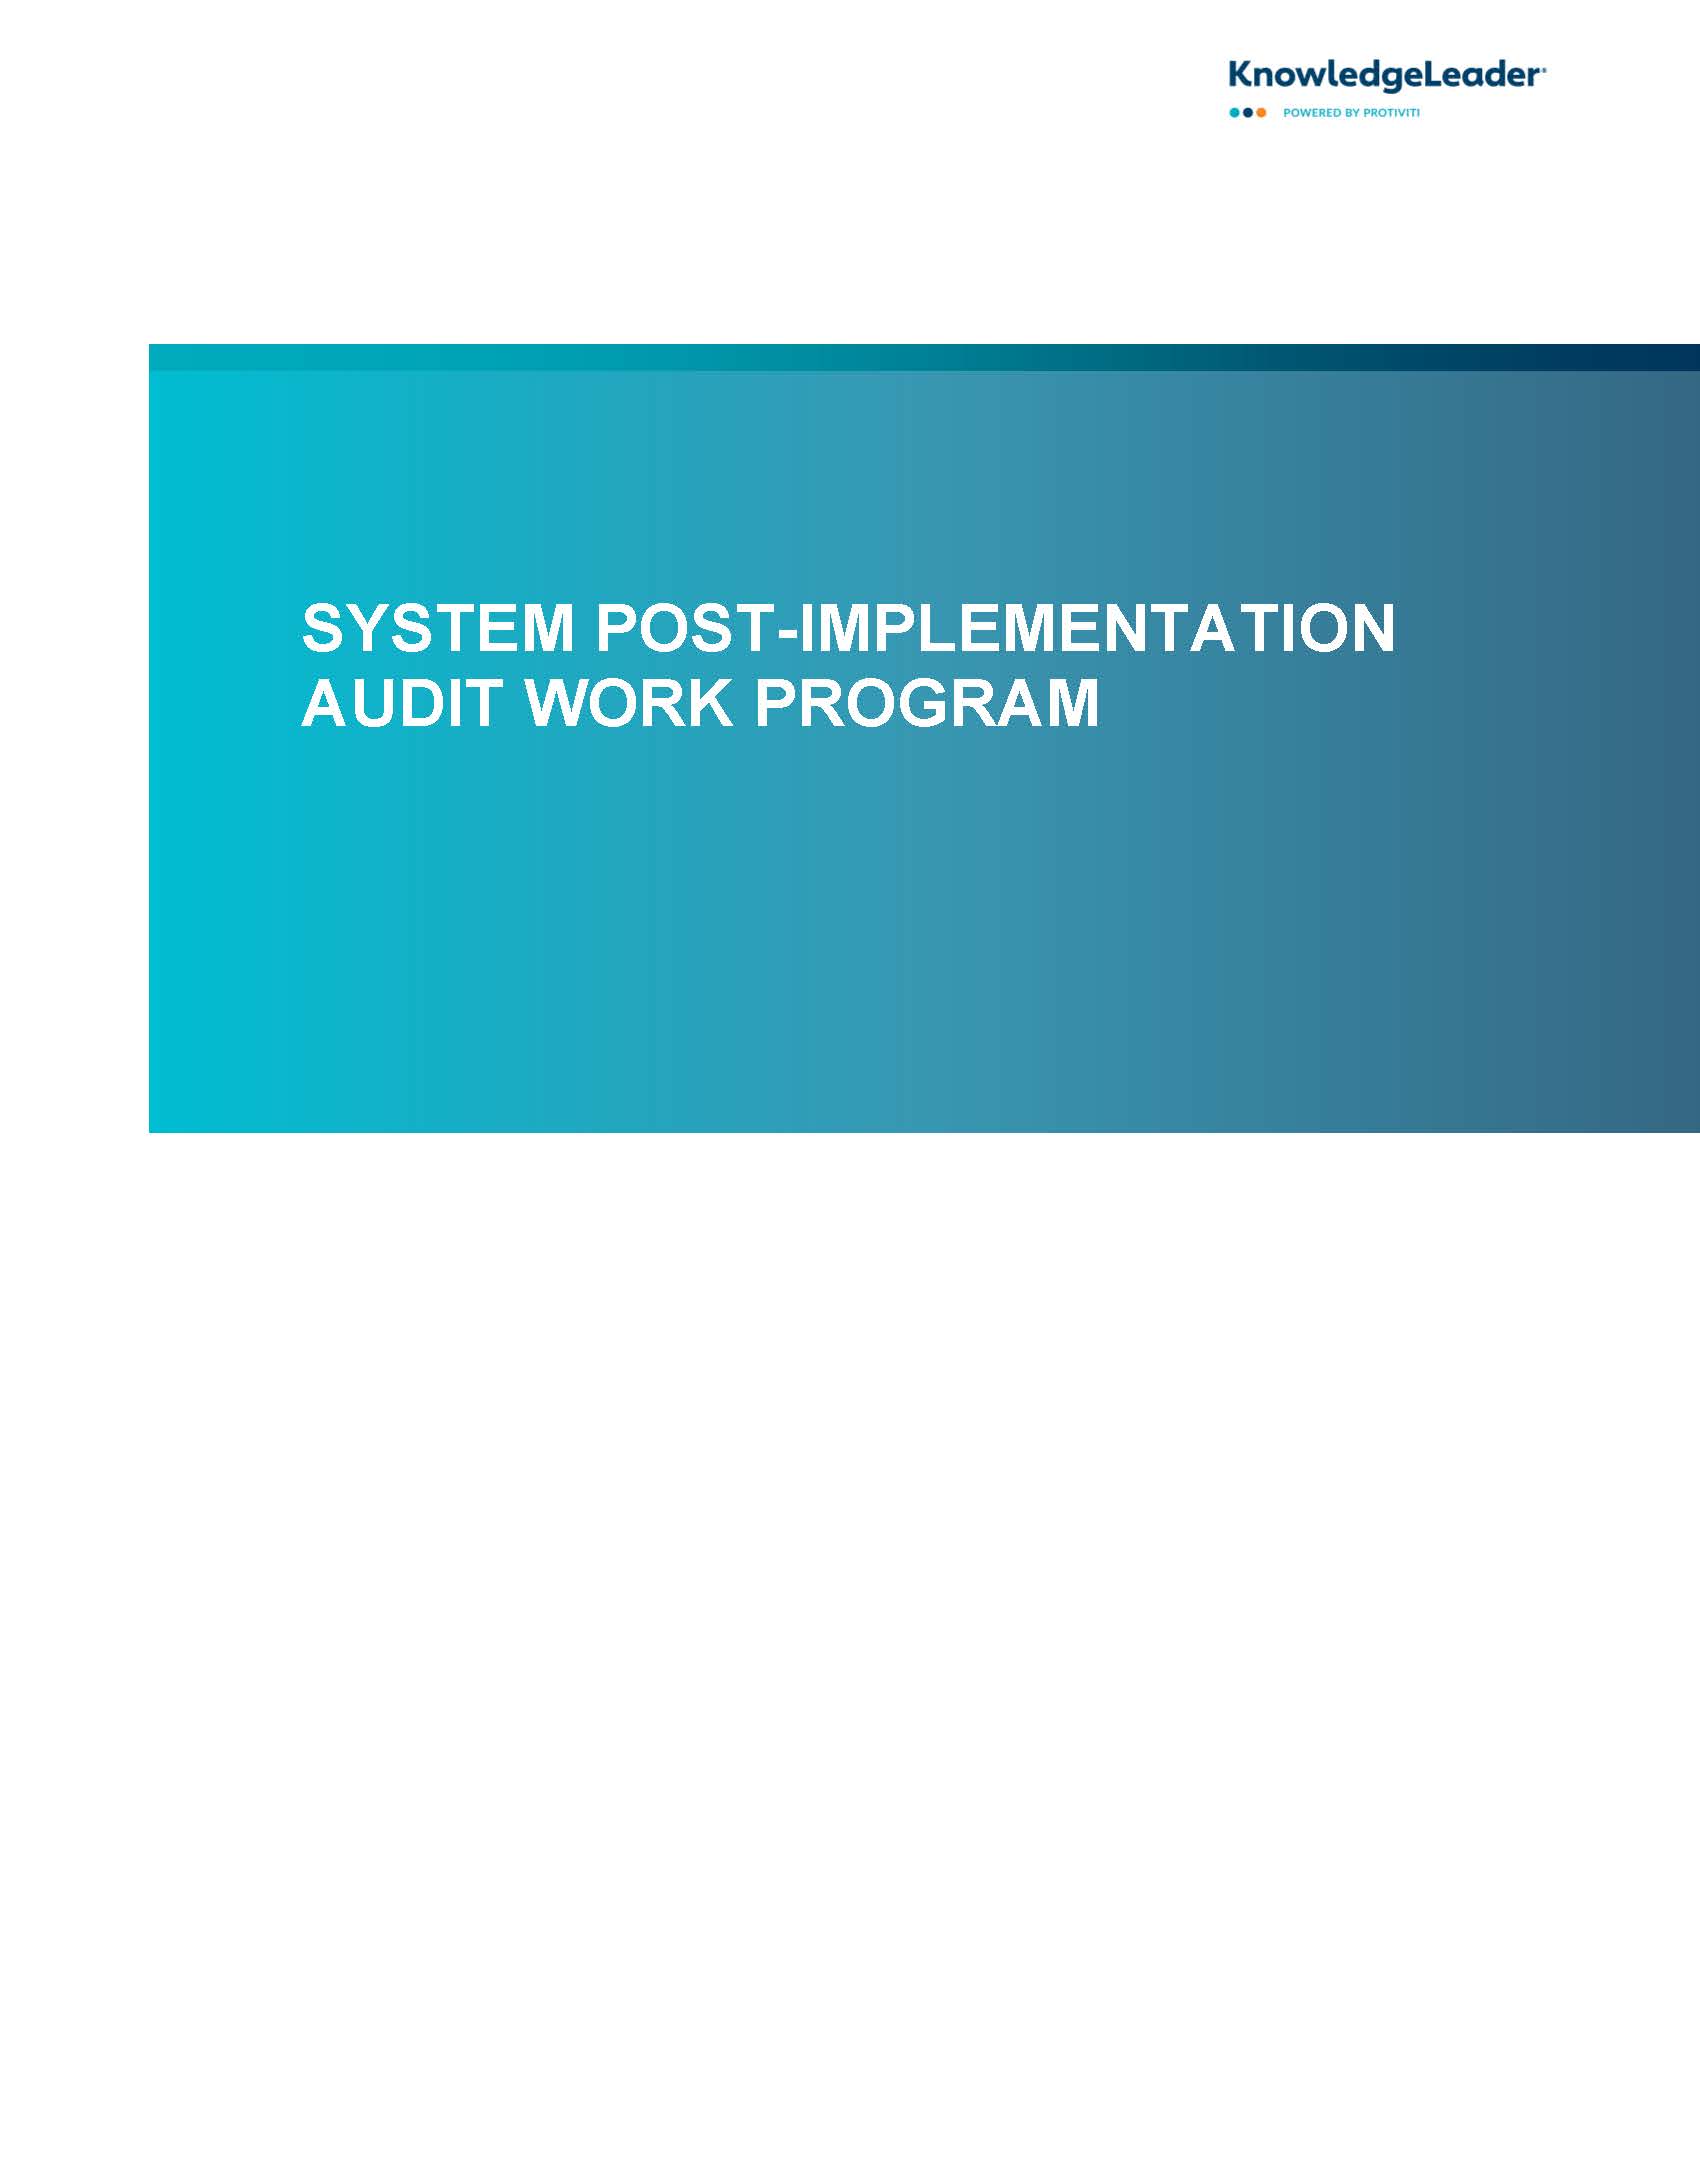 Screenshot of the first page of System Post-implementation Audit Work Program